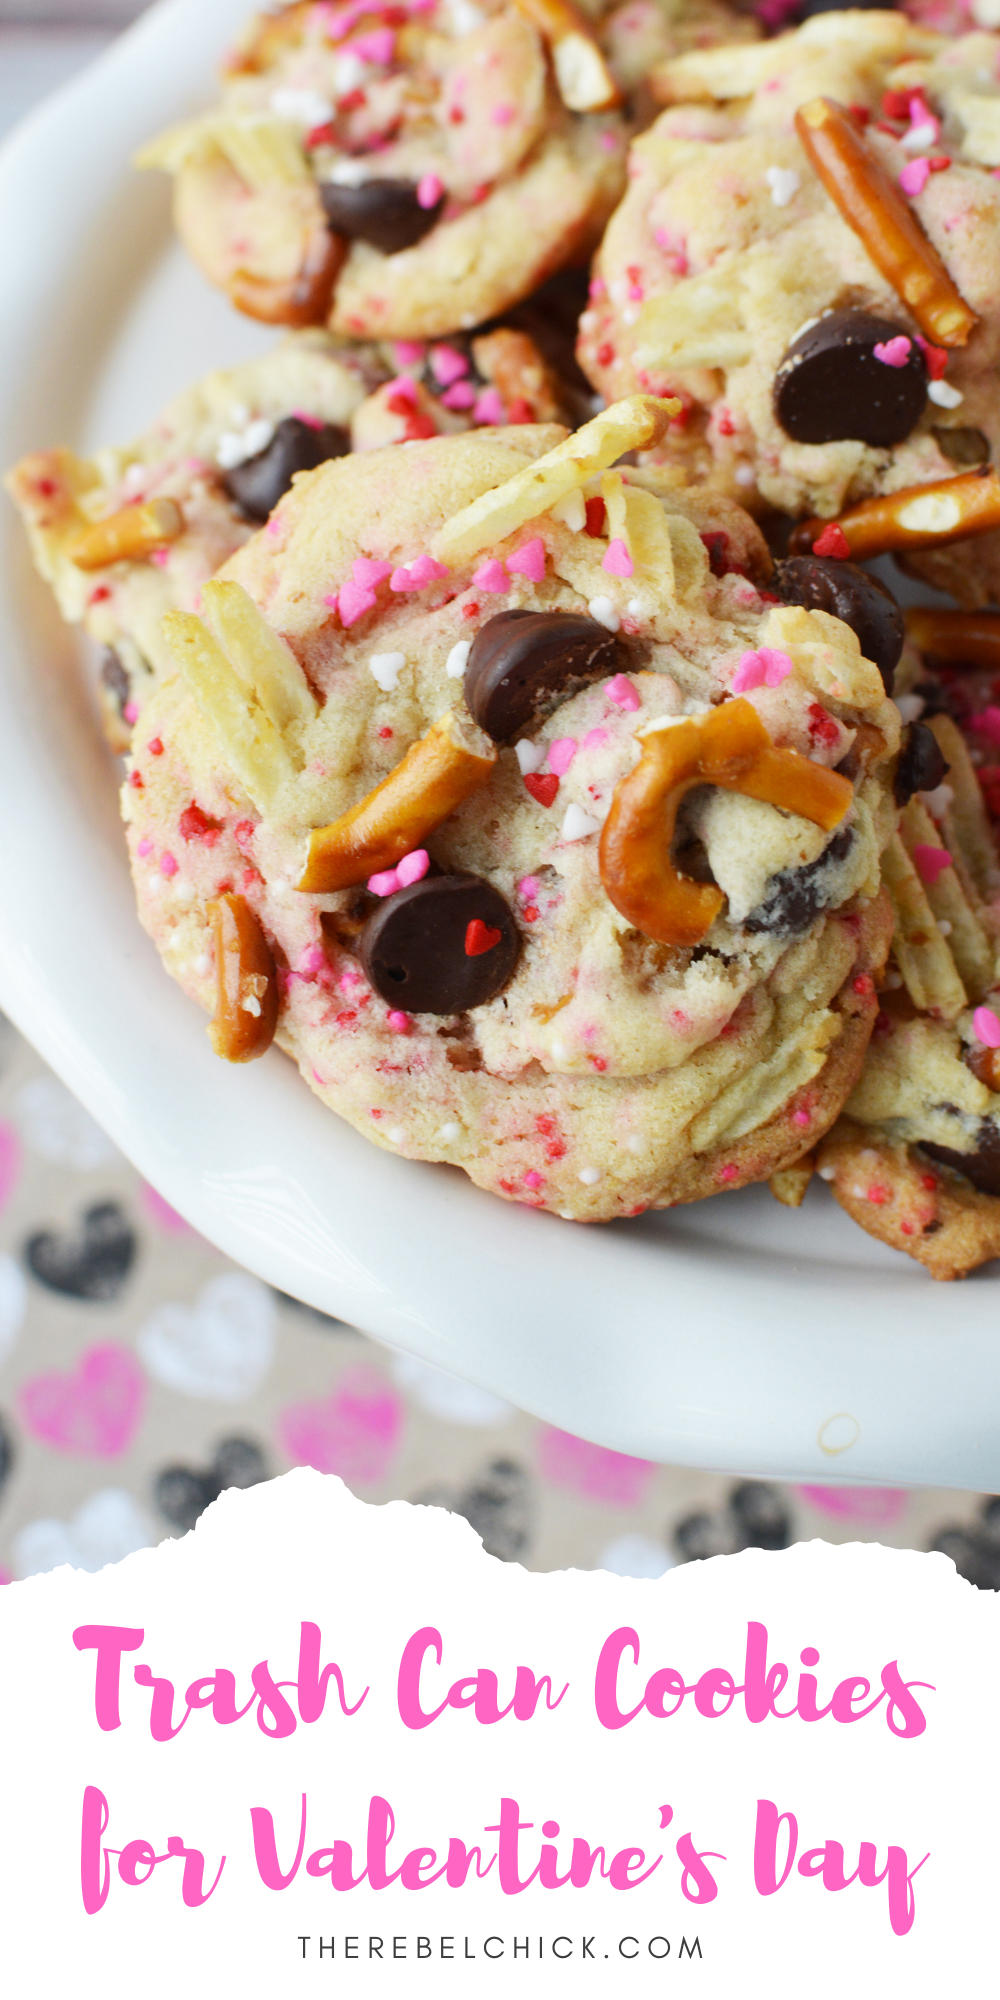 Cupid's Trash Can Cookies for Valentine's Day